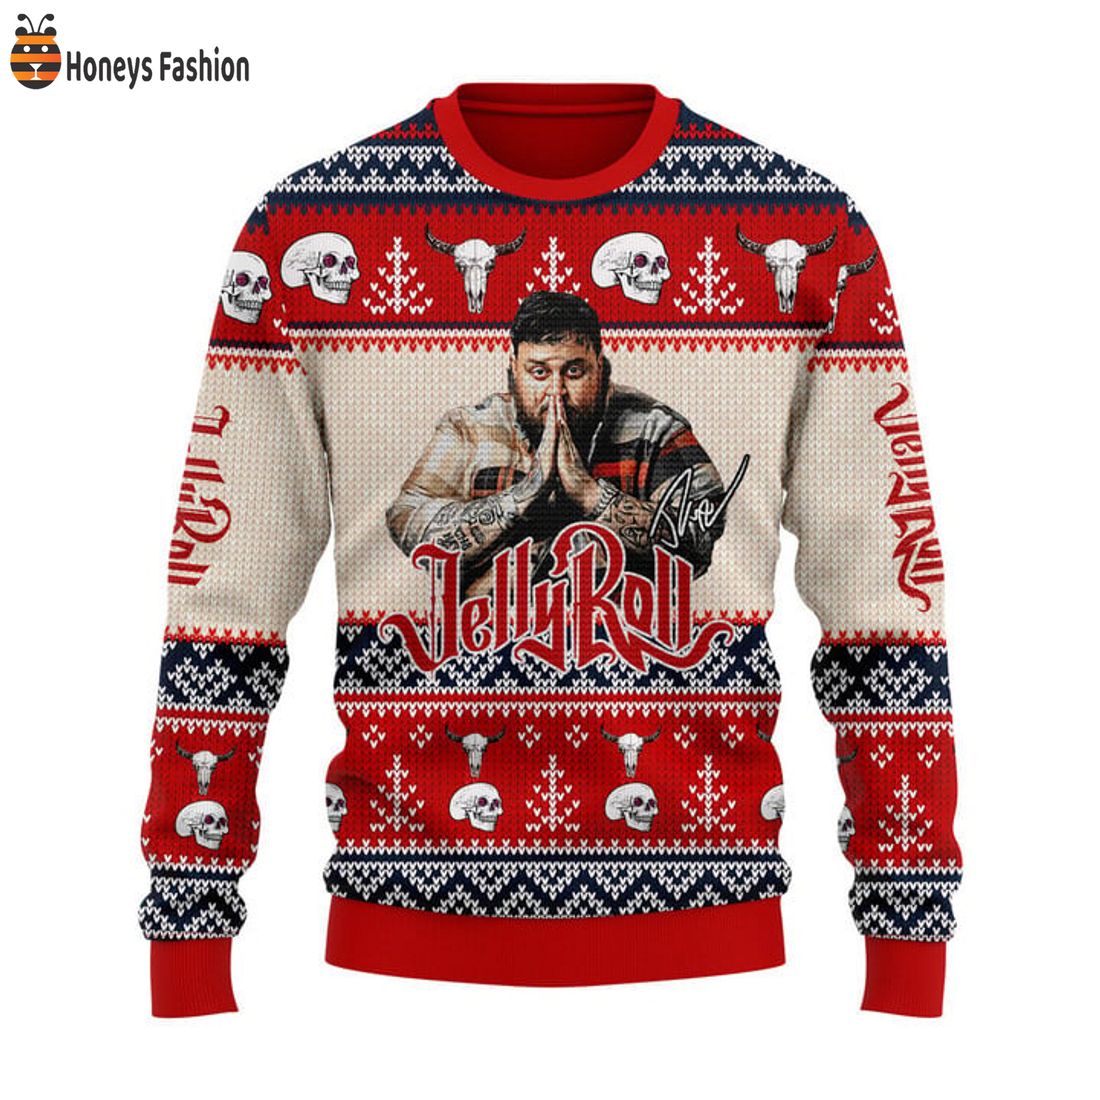 HOT Jelly Roll Somebody Save Me Ugly Christmas Sweater